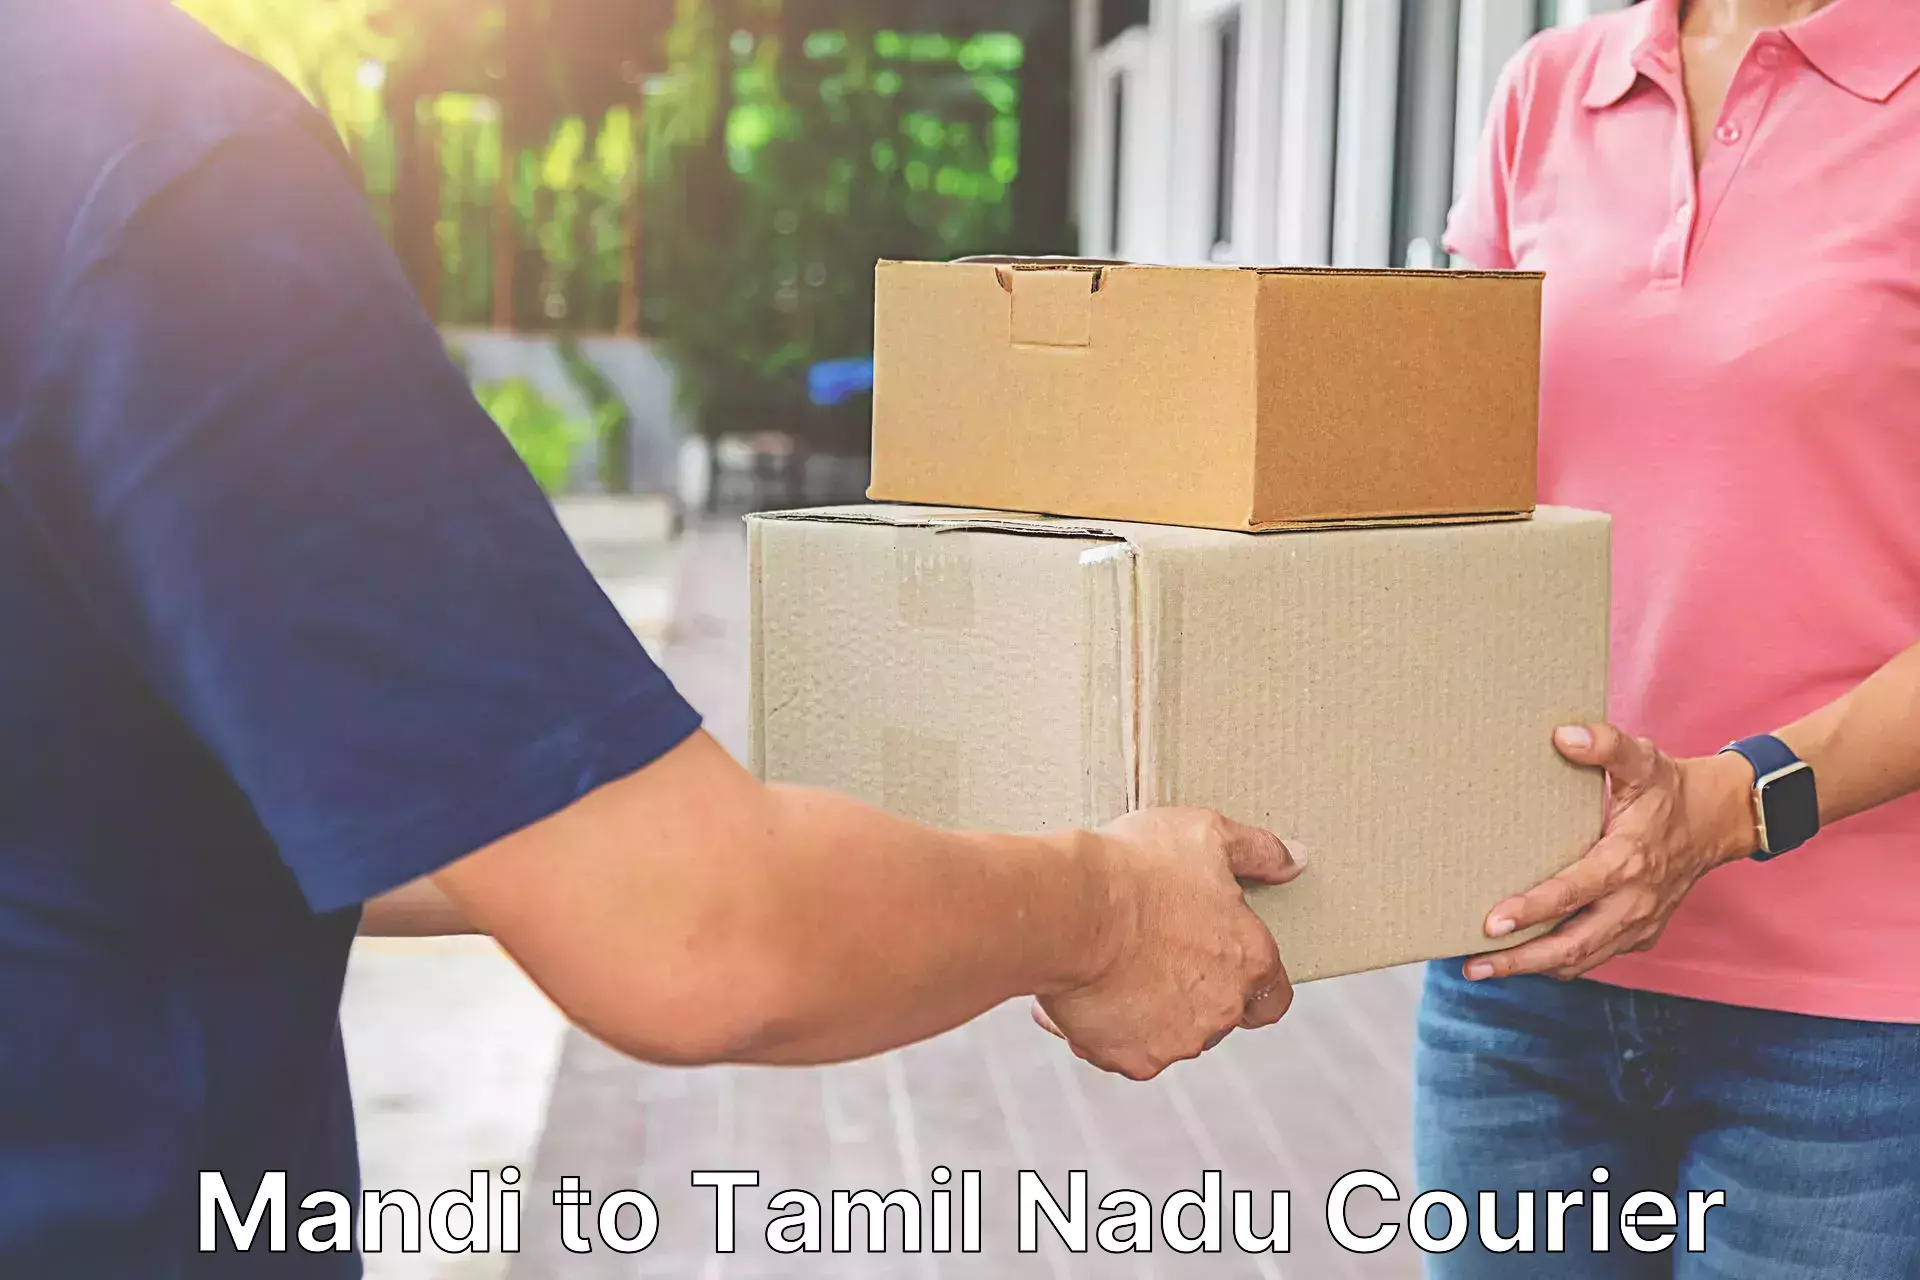 Nationwide parcel services Mandi to Ennore Port Chennai